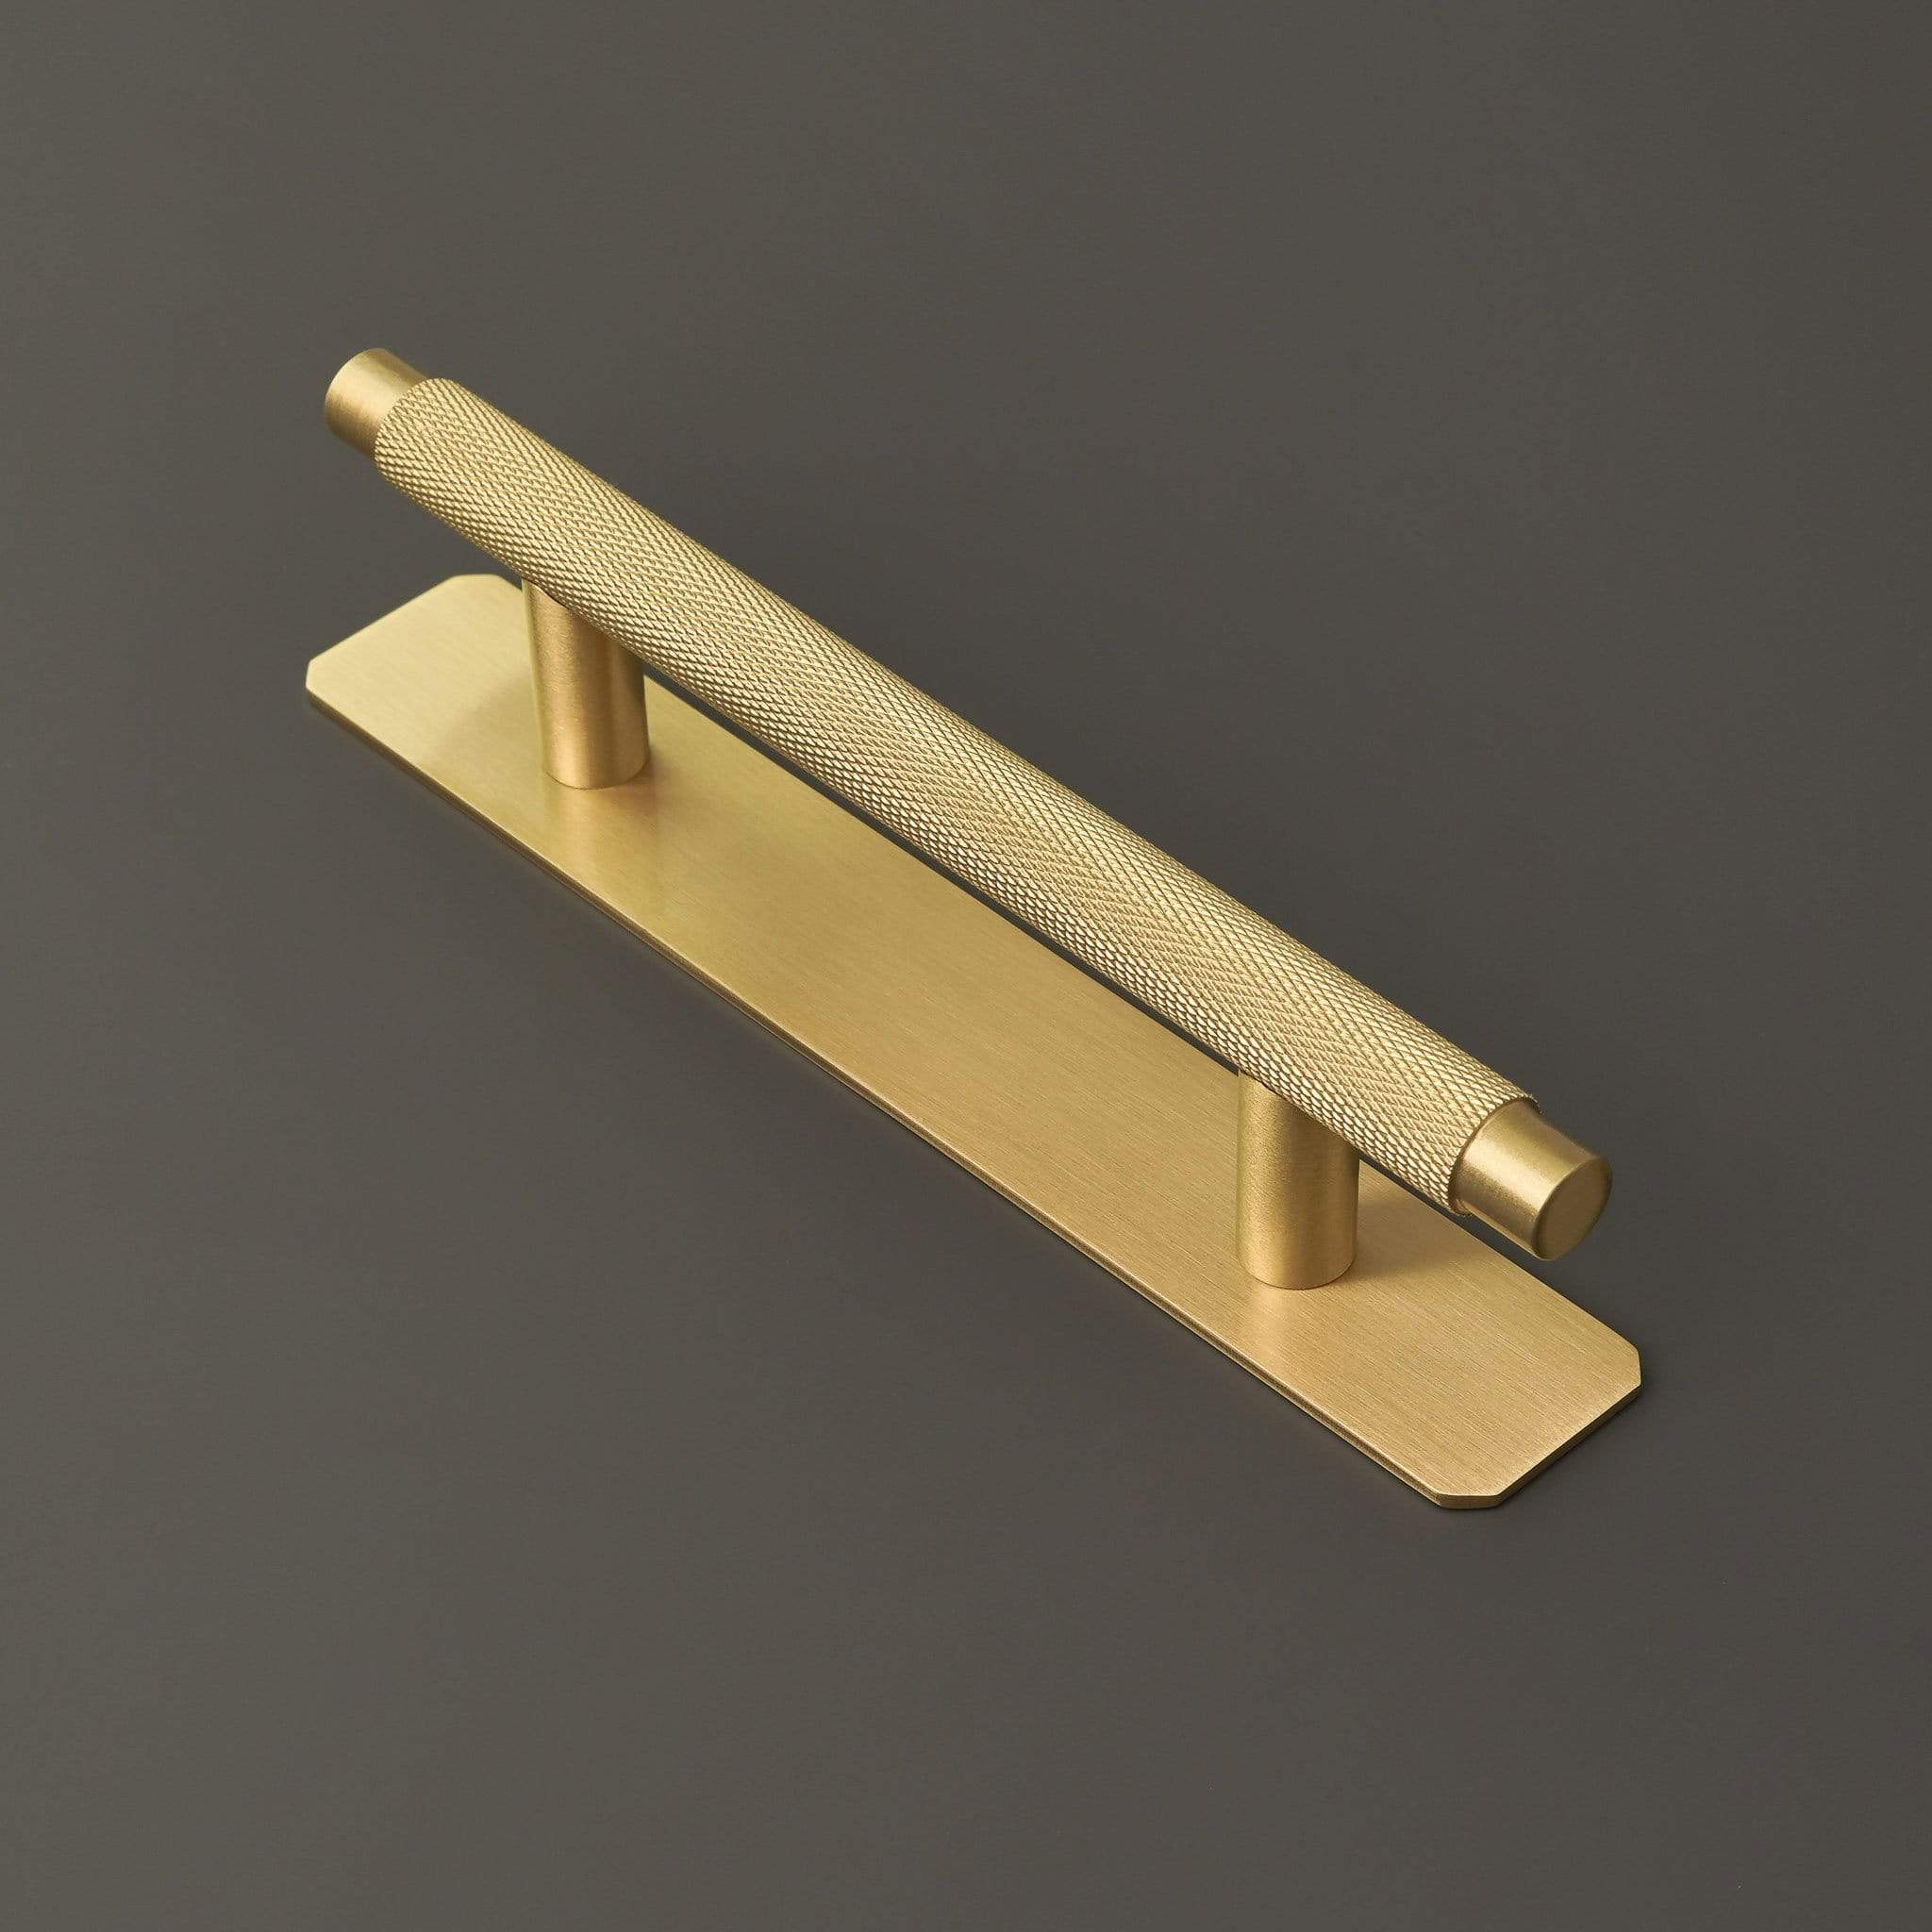 PULL BAR PLATE / BRASS CABINET PULL HANDLE WITH PLATE FOR KITCHEN